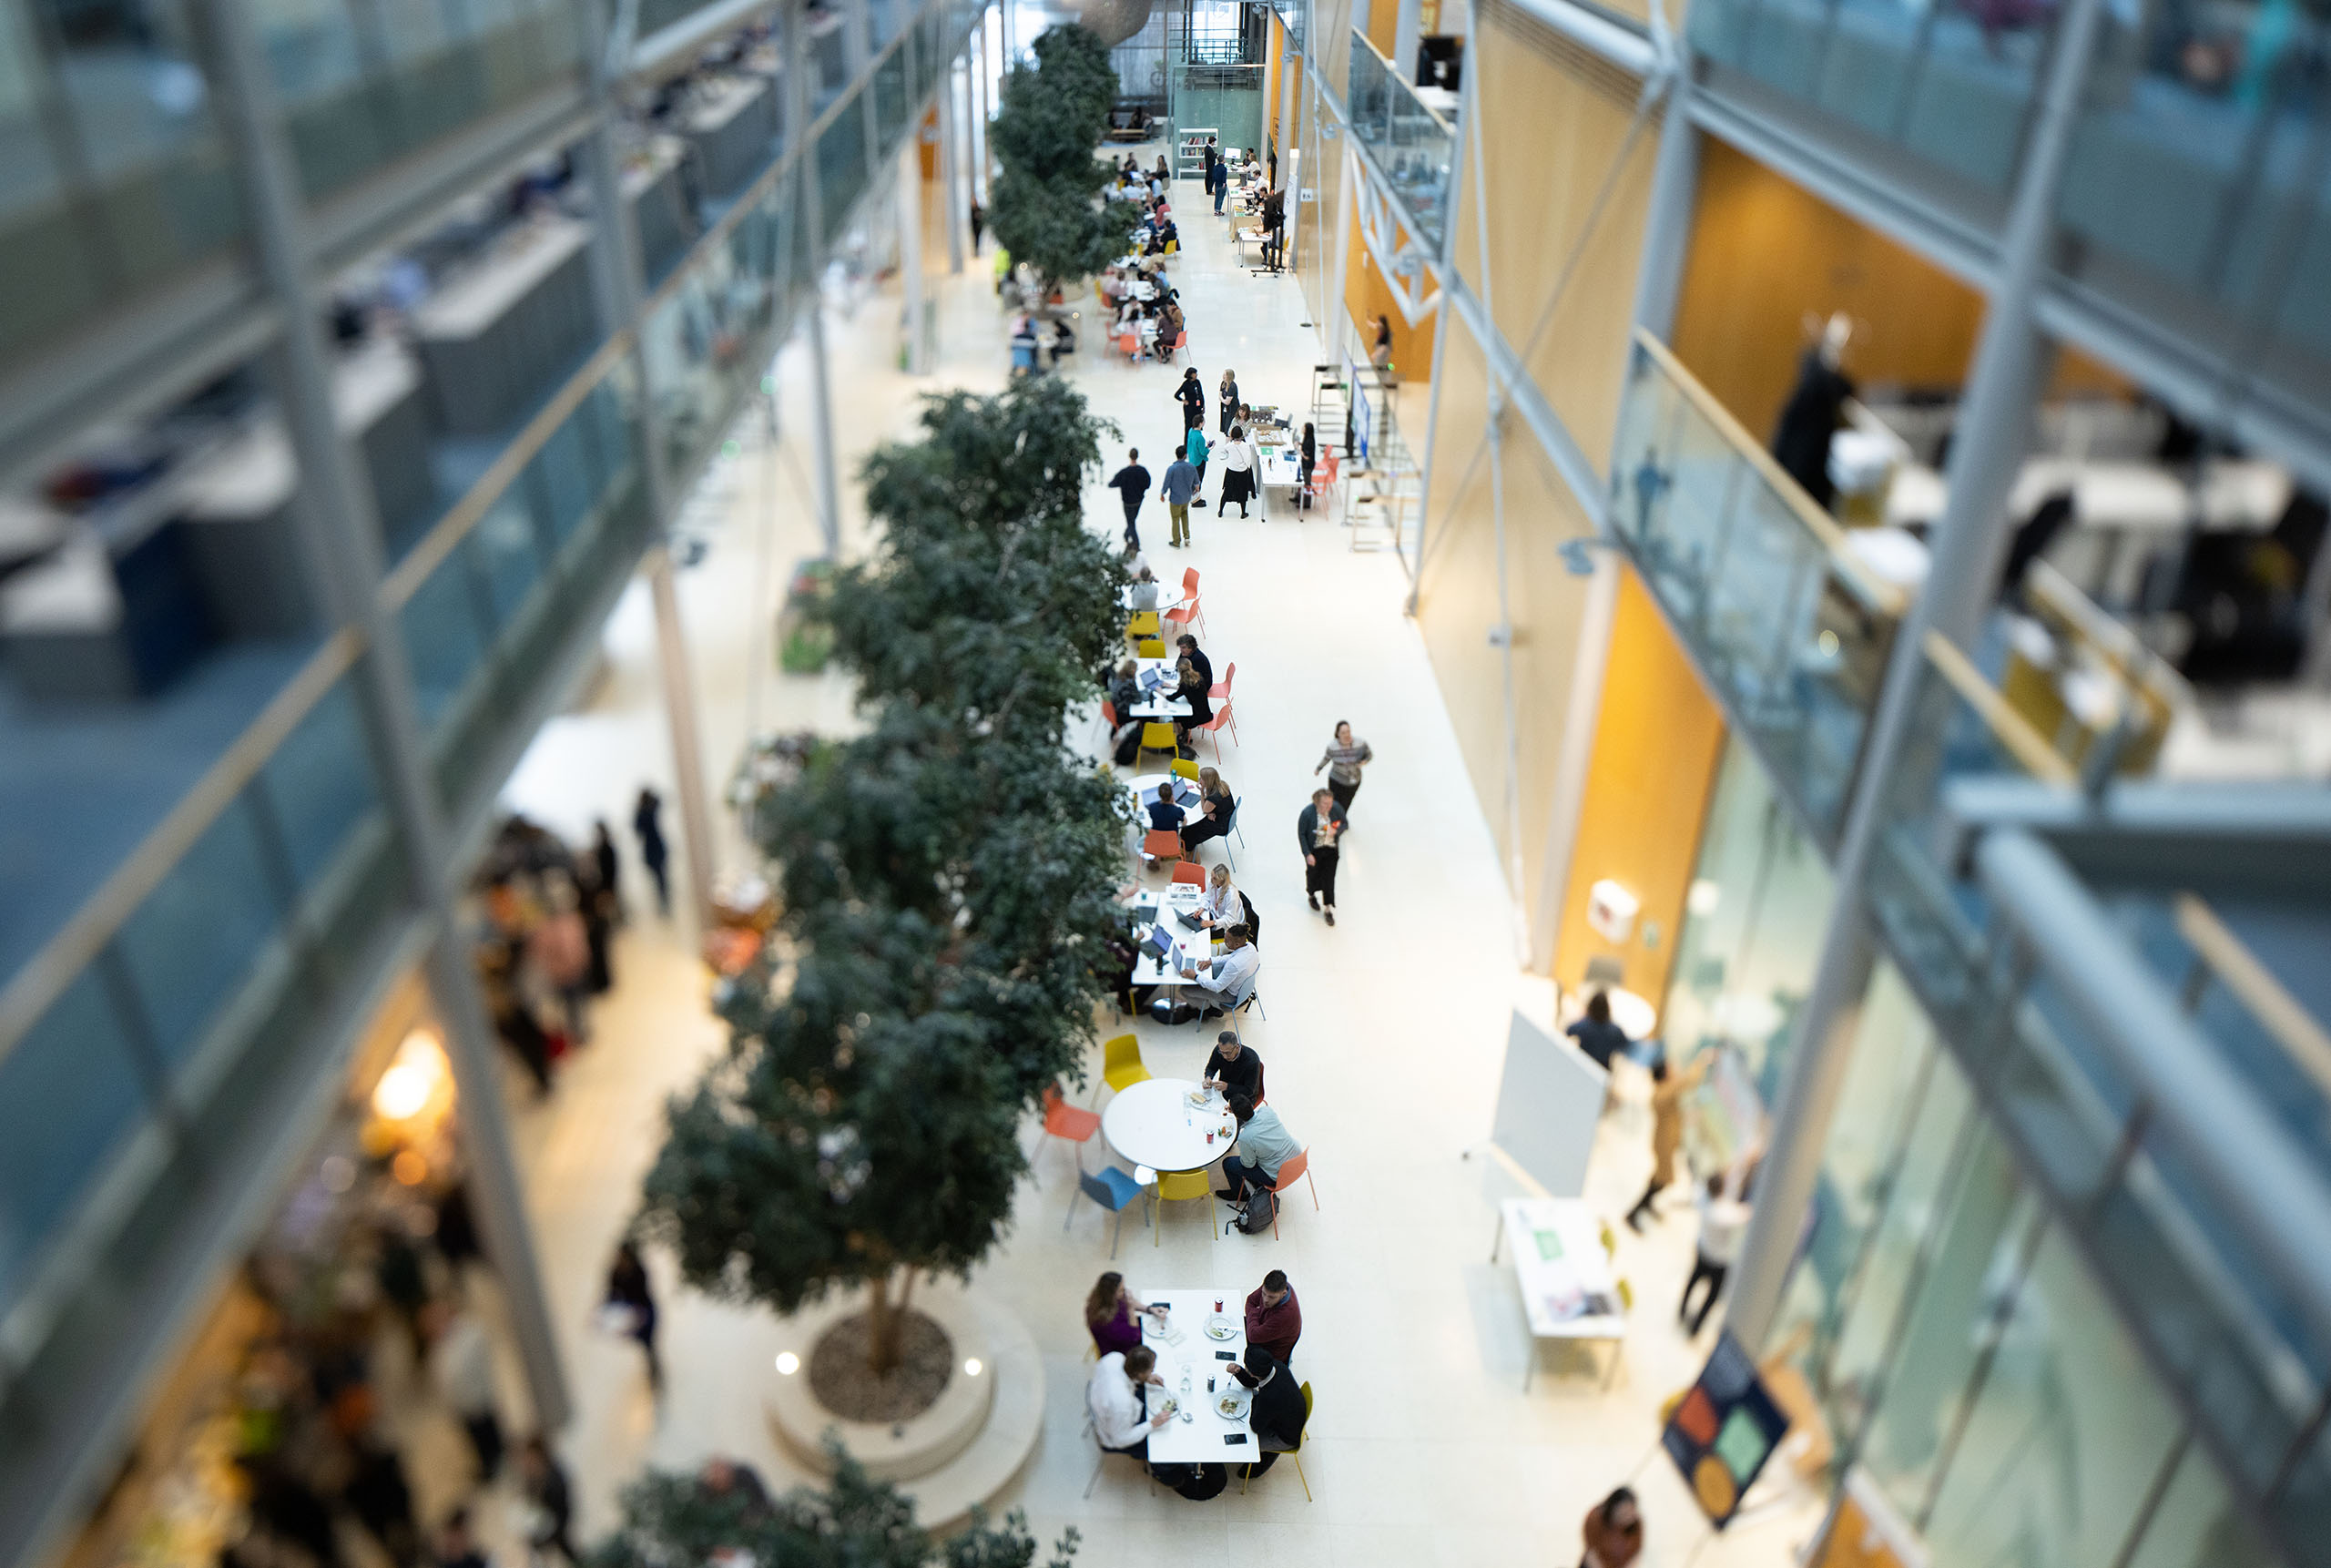 Aerial view of Wellcome staff sitting at tables and walking along the office ground floor.